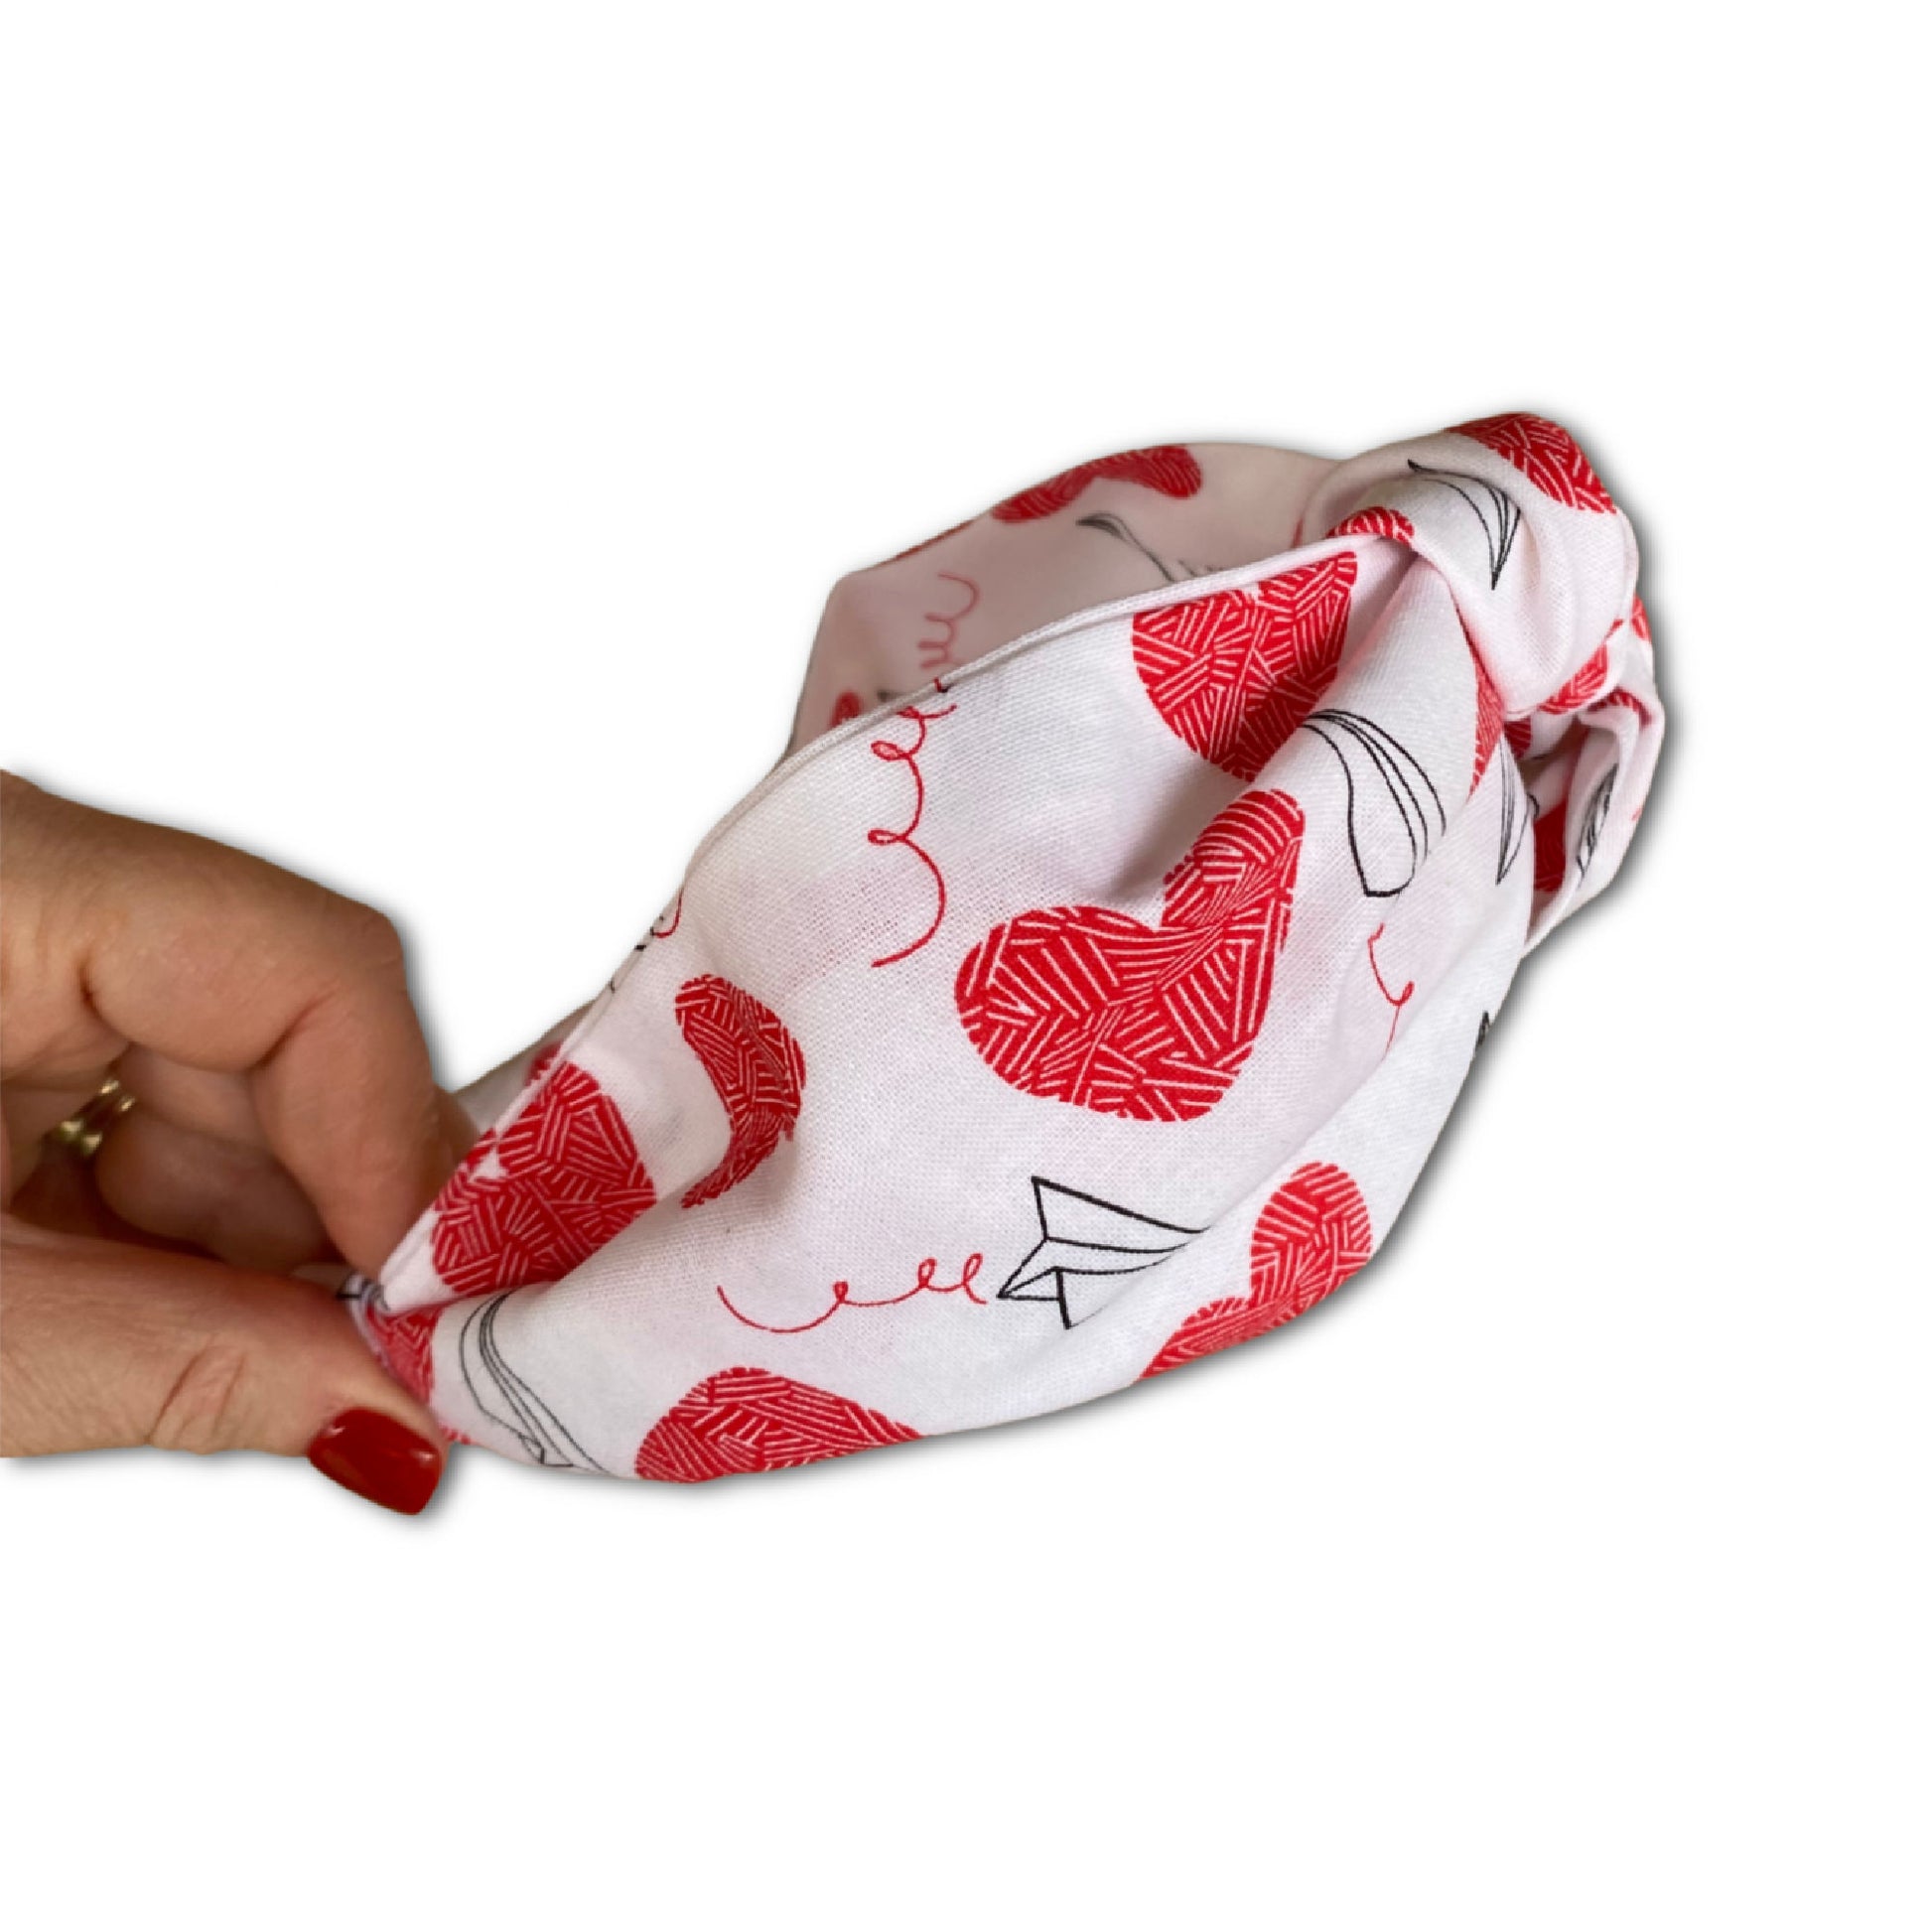 headband that has a knot at top. made with a cotton print that is white with red large hearts and paper airplane outlines